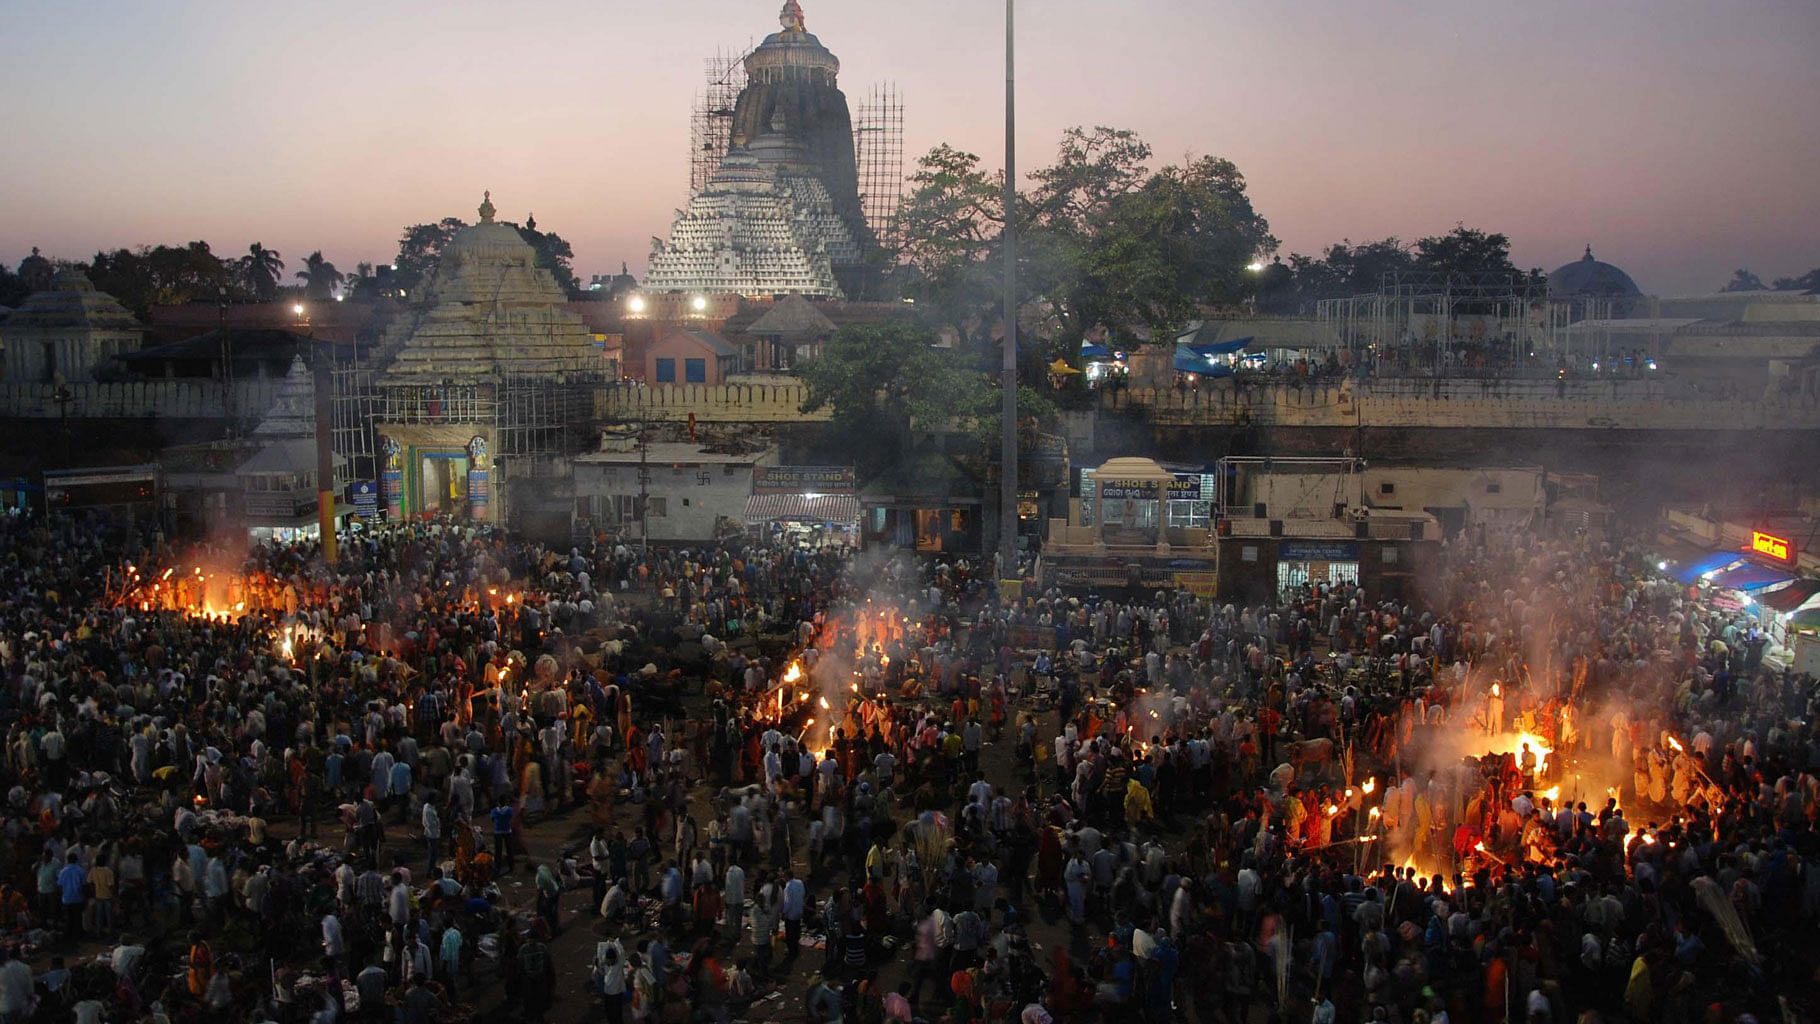 Devotees witness the rituals being performed at the lord Jagannath Temple to pay homage to their ancestors in Puri on the occasion of Diwali. (Photo Courtesy: IANS)